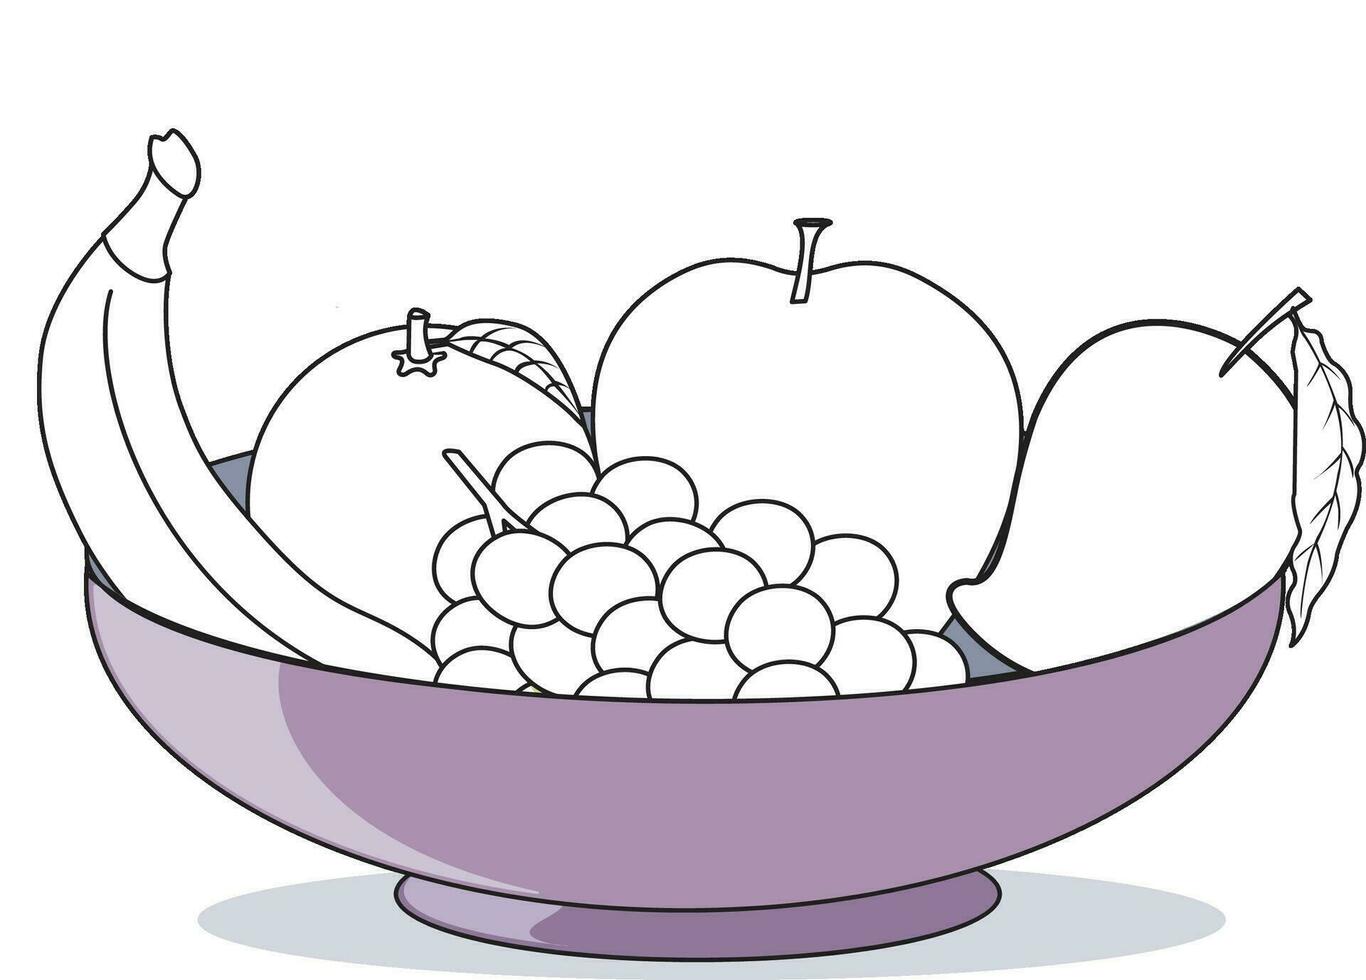 Vector illustration showing outlines of banana, apple, mango, grapes and orange placed in a basket